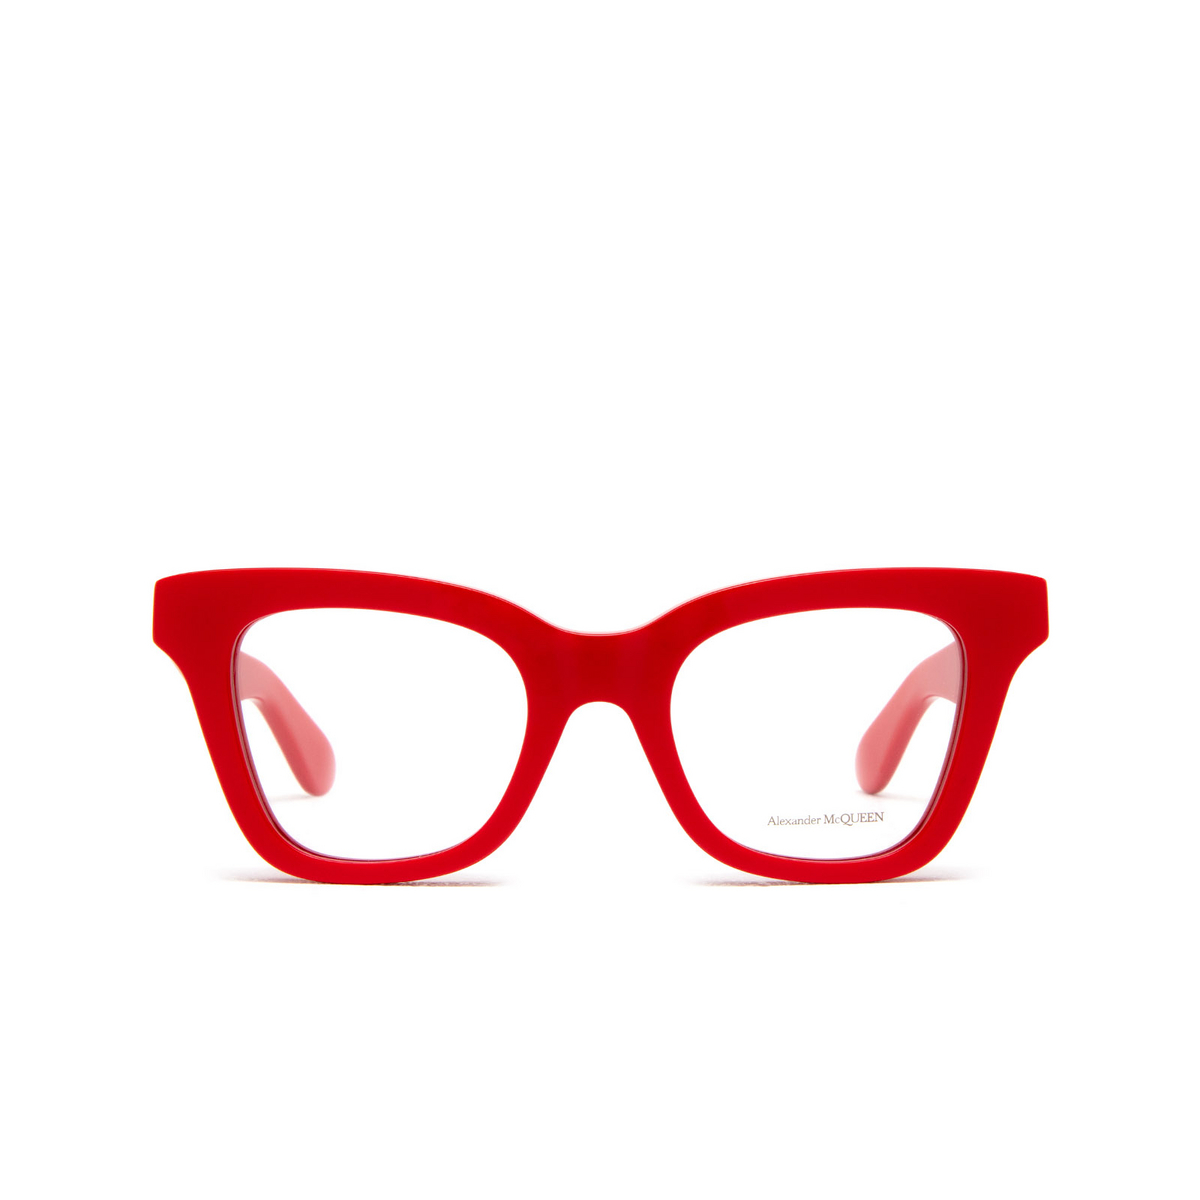 Alexander McQueen AM0394O Eyeglasses 003 Red - front view